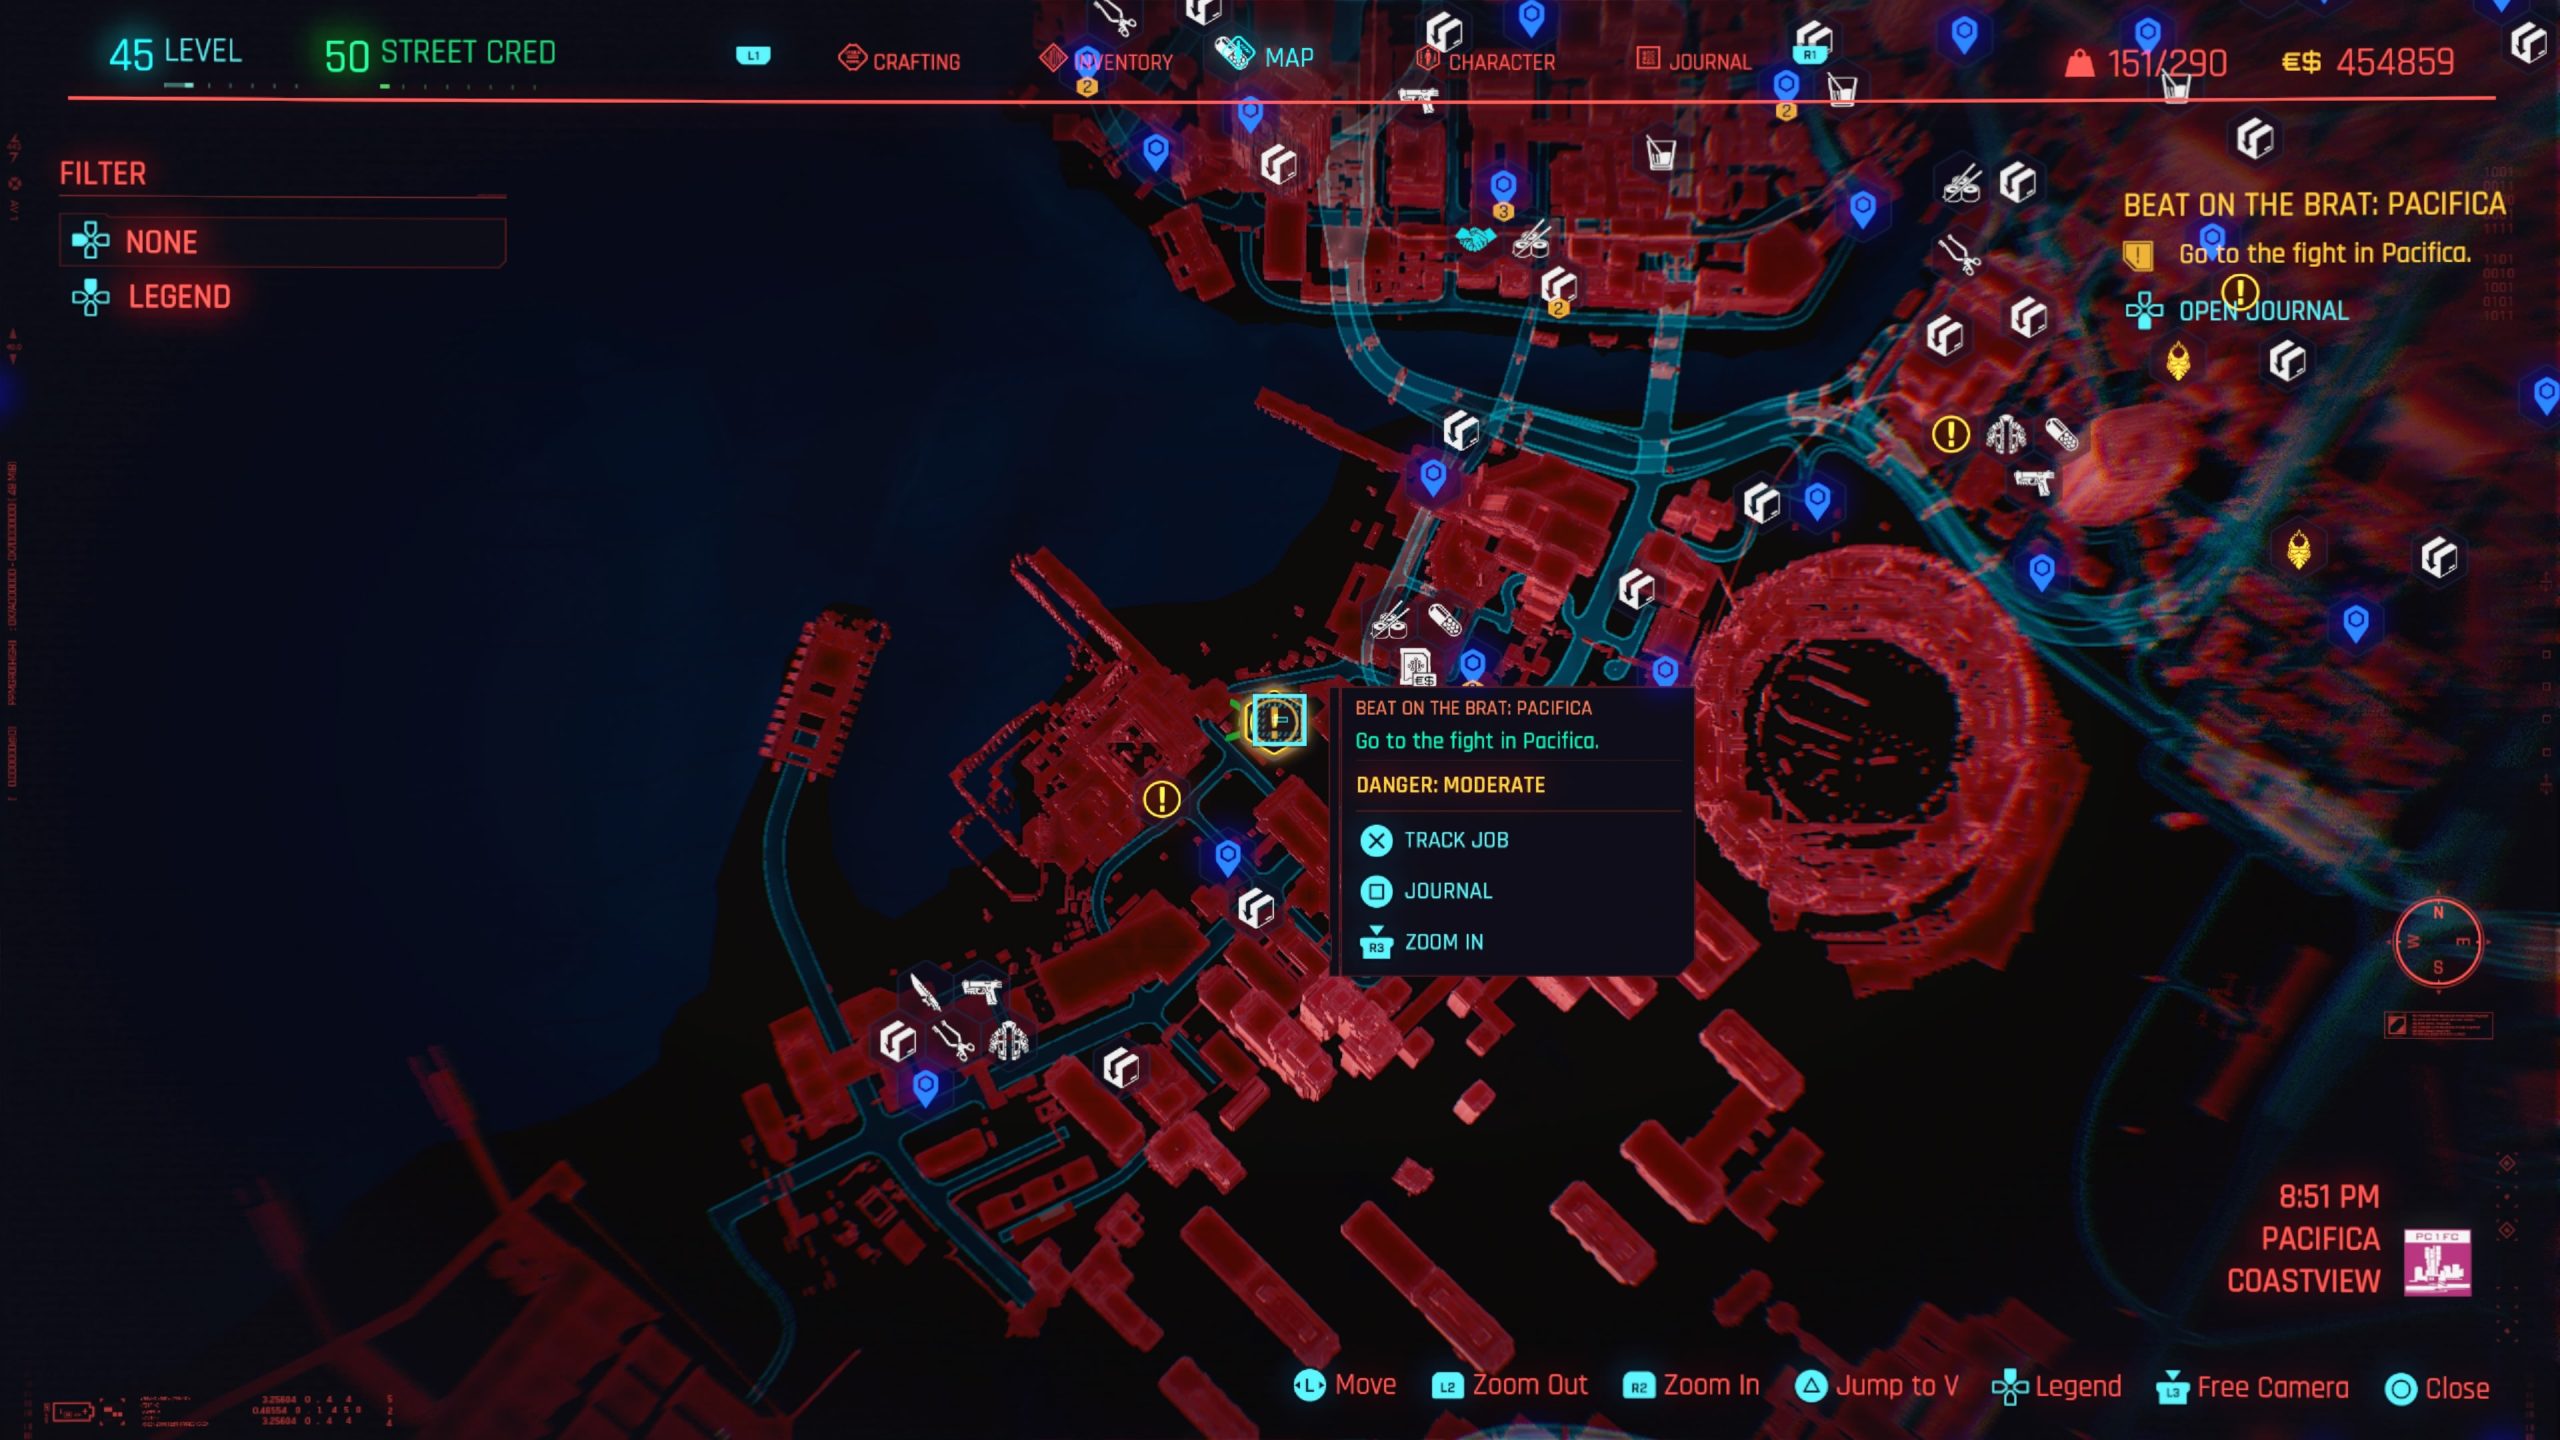 Fight in Pacifica shown on map